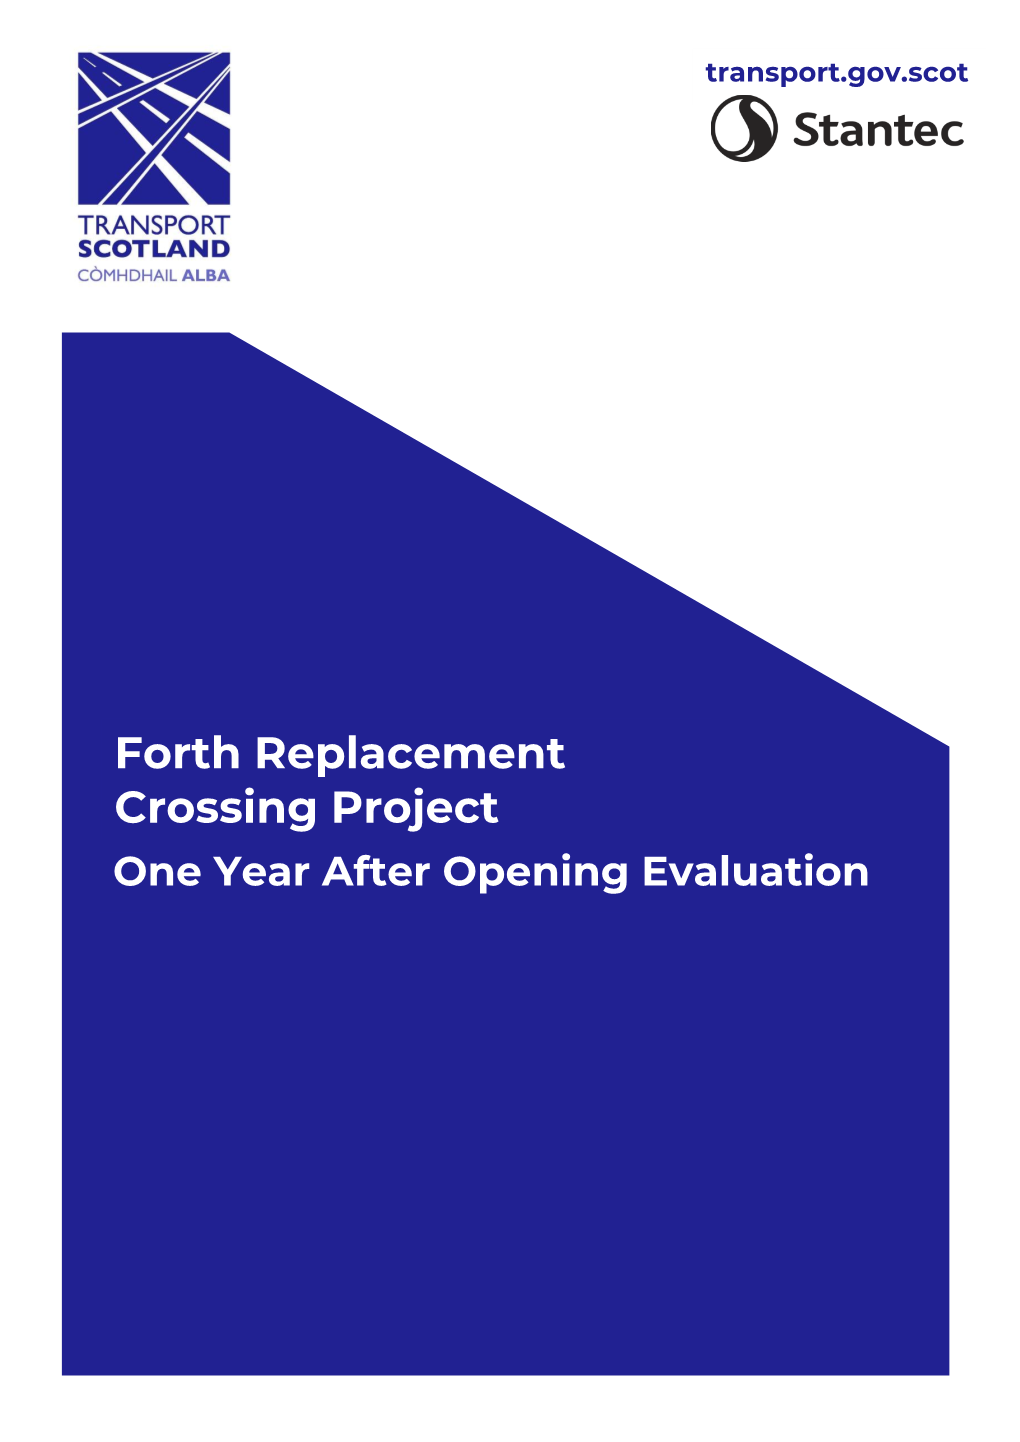 Forth Replacement Crossing Project One Year After Opening Evaluation Forth Replacement Crossing Project One Year After Opening Evaluation Transport Scotland